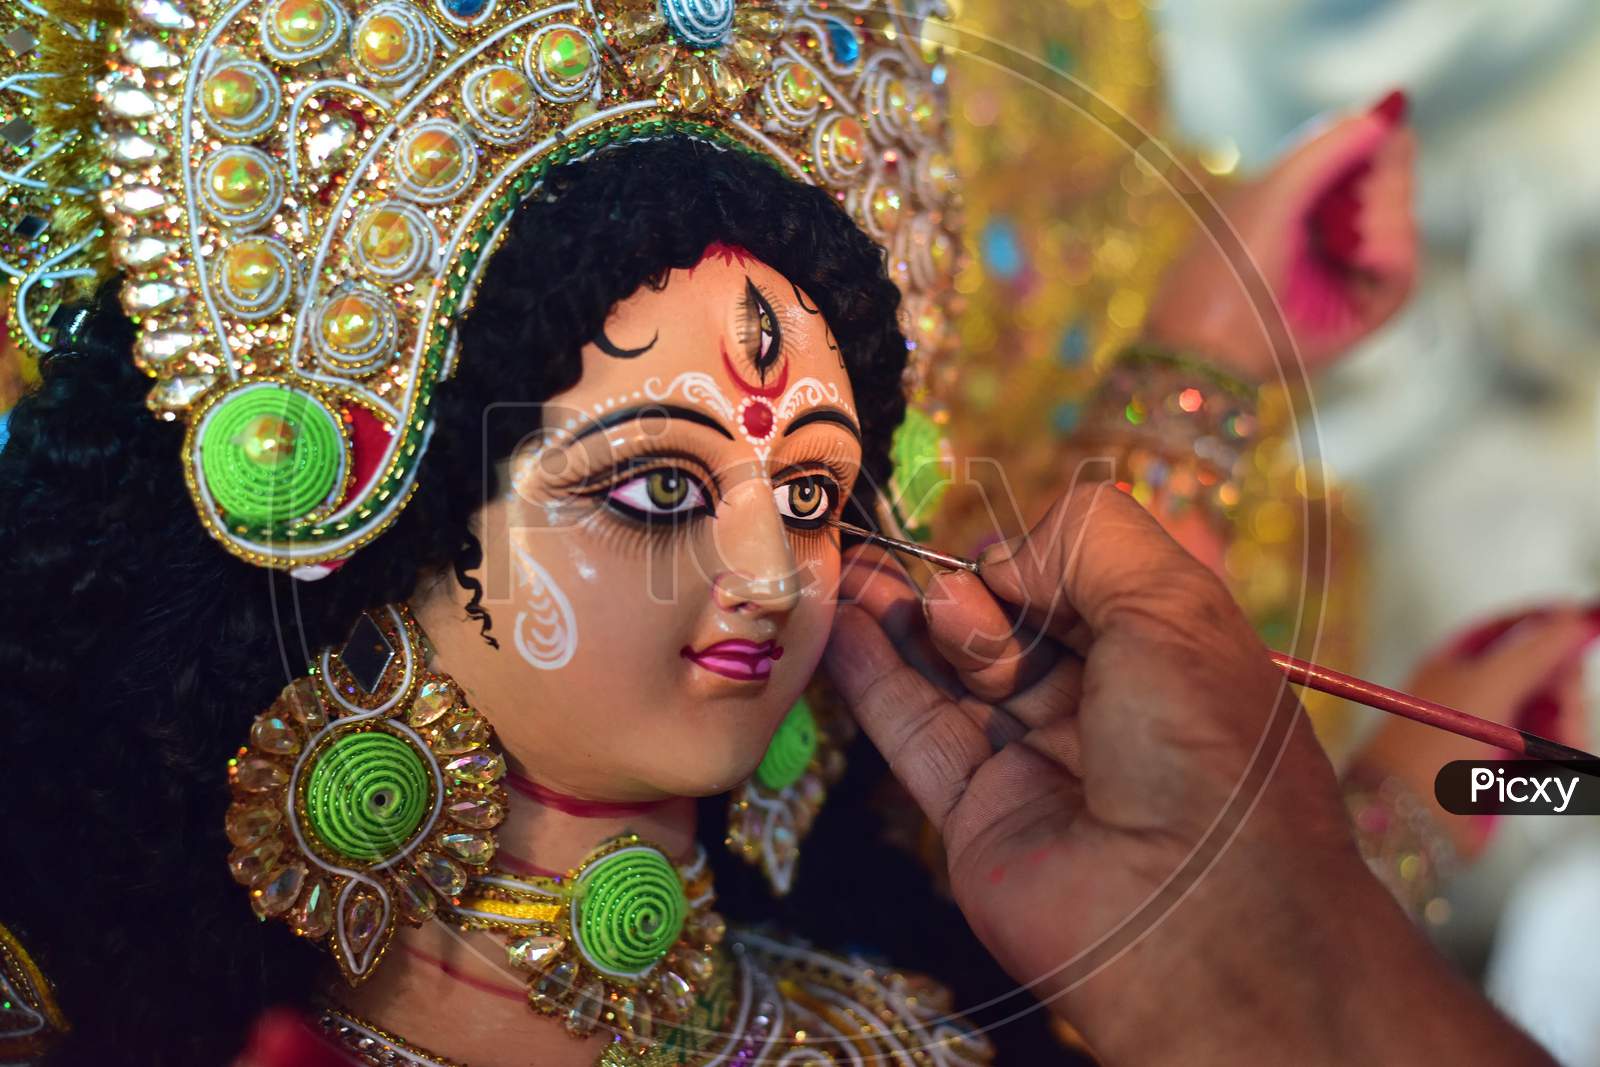 An artisan gives finishing touches to a clay sculpture depicting Hindu goddess Durga at a workshop ahead of the upcoming 'Durga Puja' festival, in Guwahati on October 13, 2020